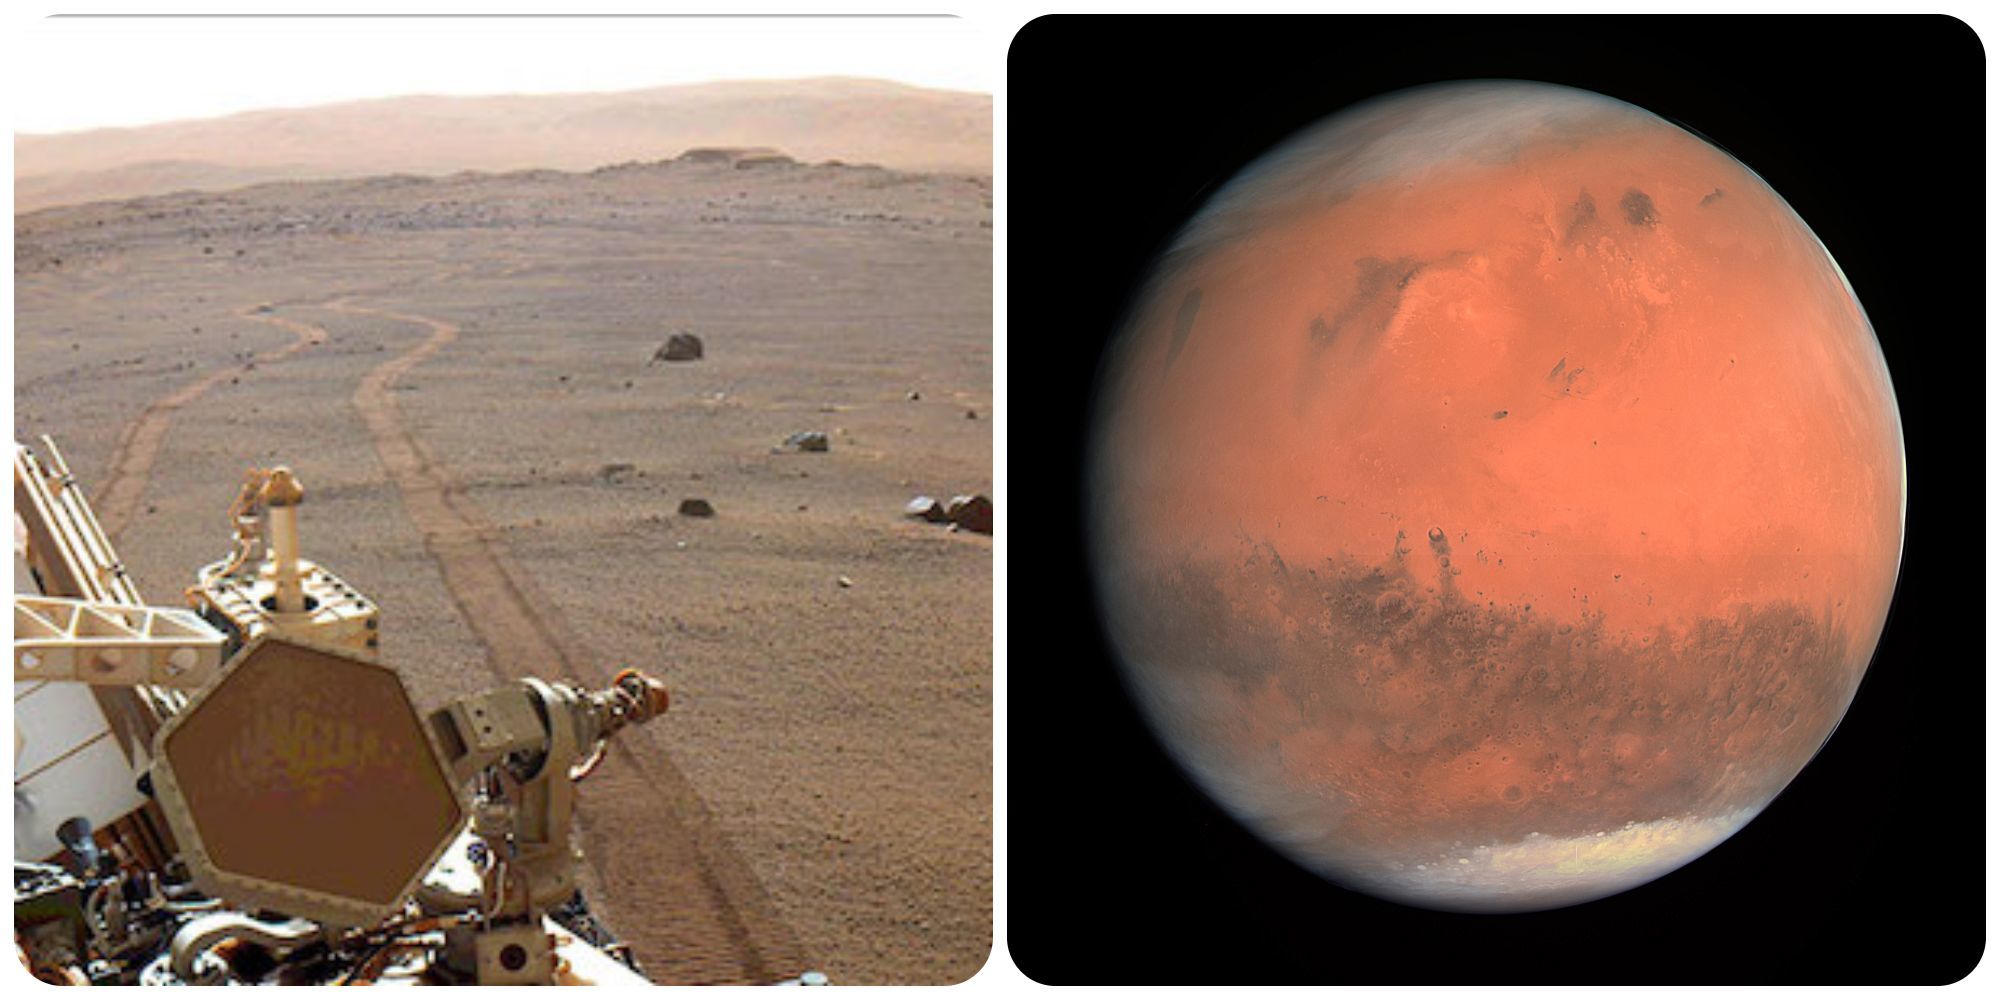 Probe explores plains in search of evidence of life on Mars